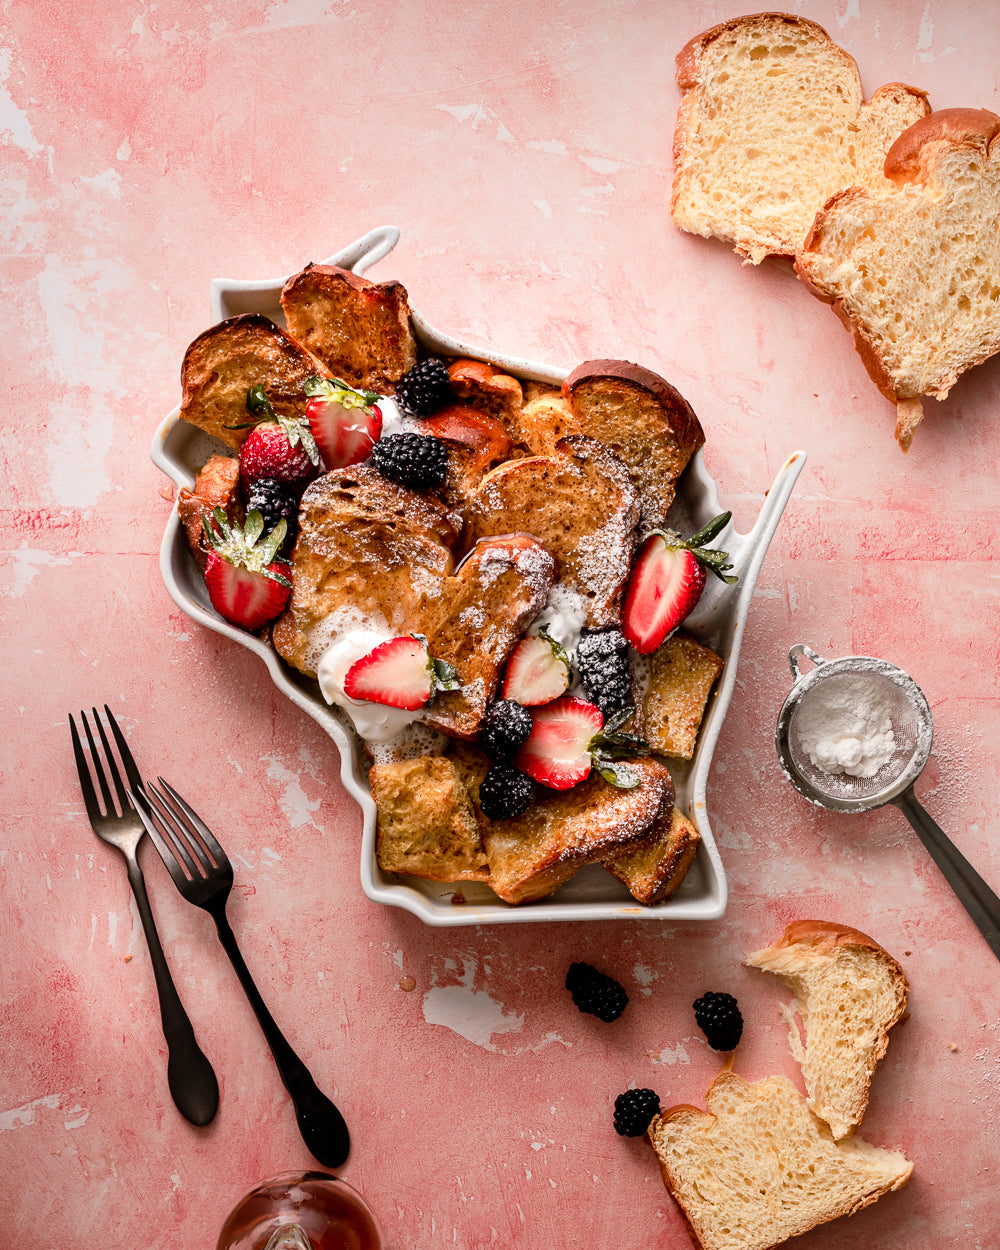 Wisconsin state plate bread pudding dessert. Wisconsin dessert bake. WI dessert dish. WI dessert bakeware. Wisconsin dessert tray. Wisconsin cooking gift. WI cooking gift. WI baking gift. Wisconsin baking gift. 